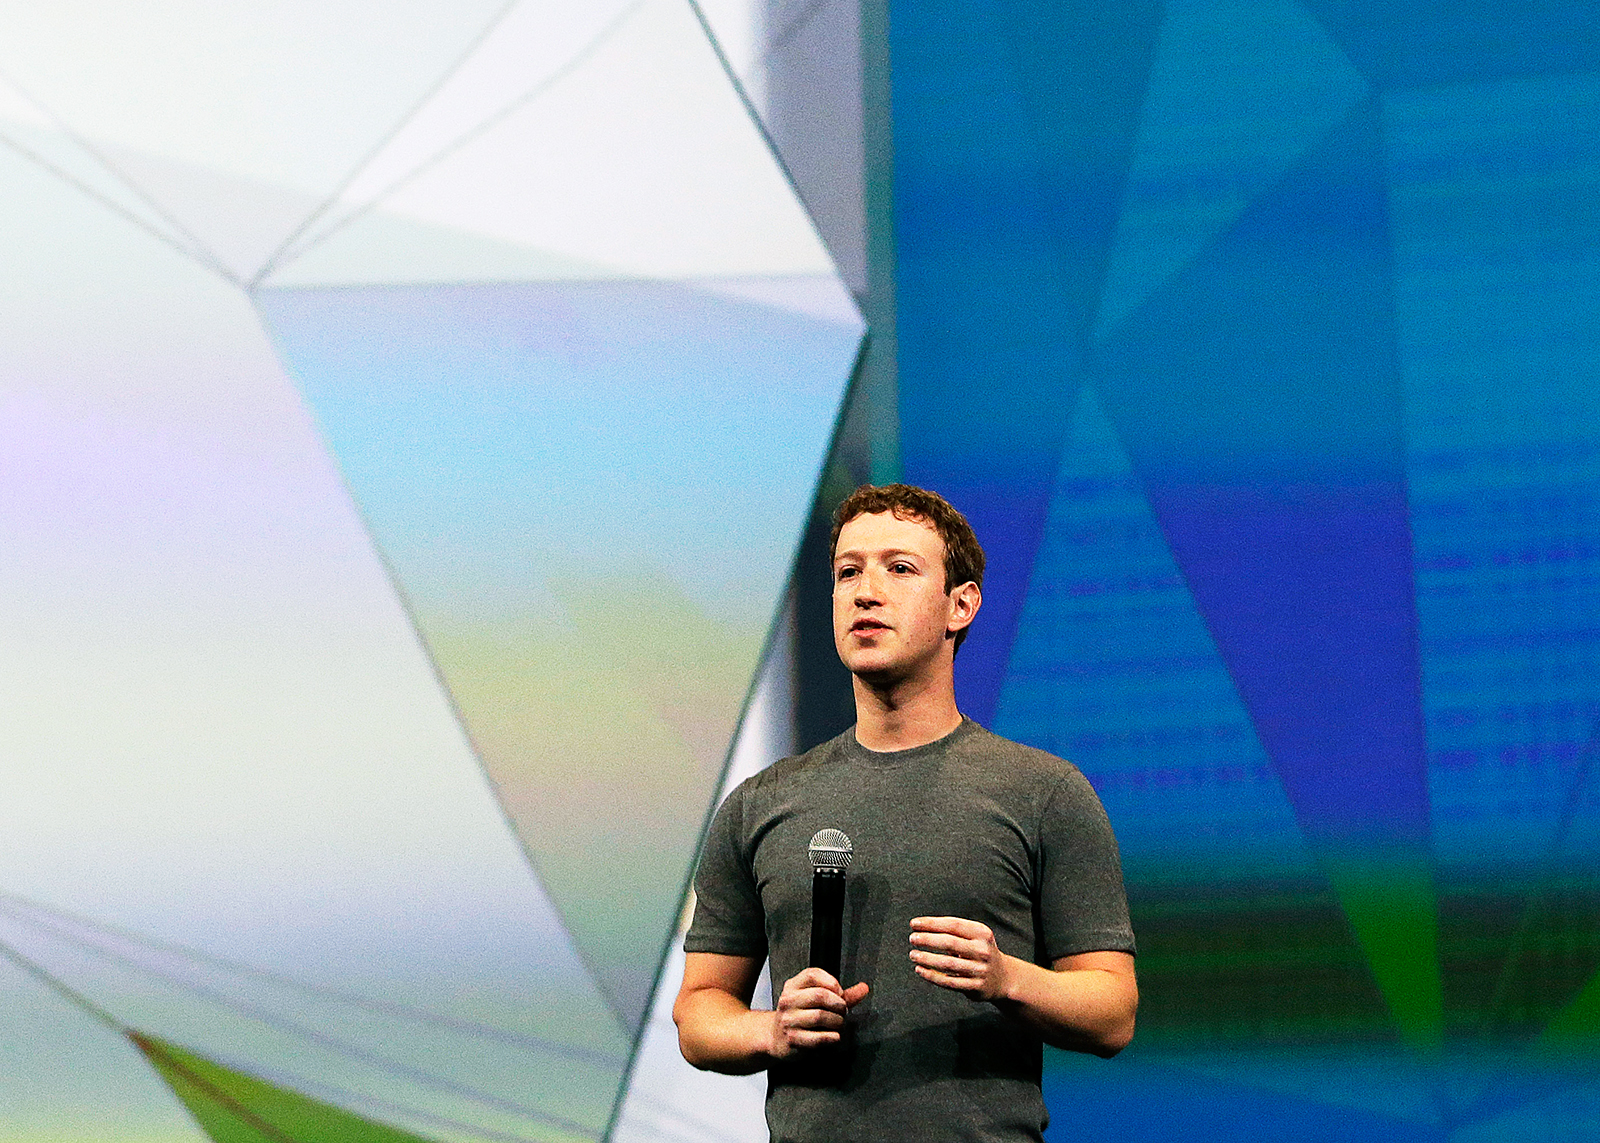 Mark Zuckerberg delivers the keynote address at the f8 Facebook Developer Conference Wednesday, April 30, 2014, in San Francisco.